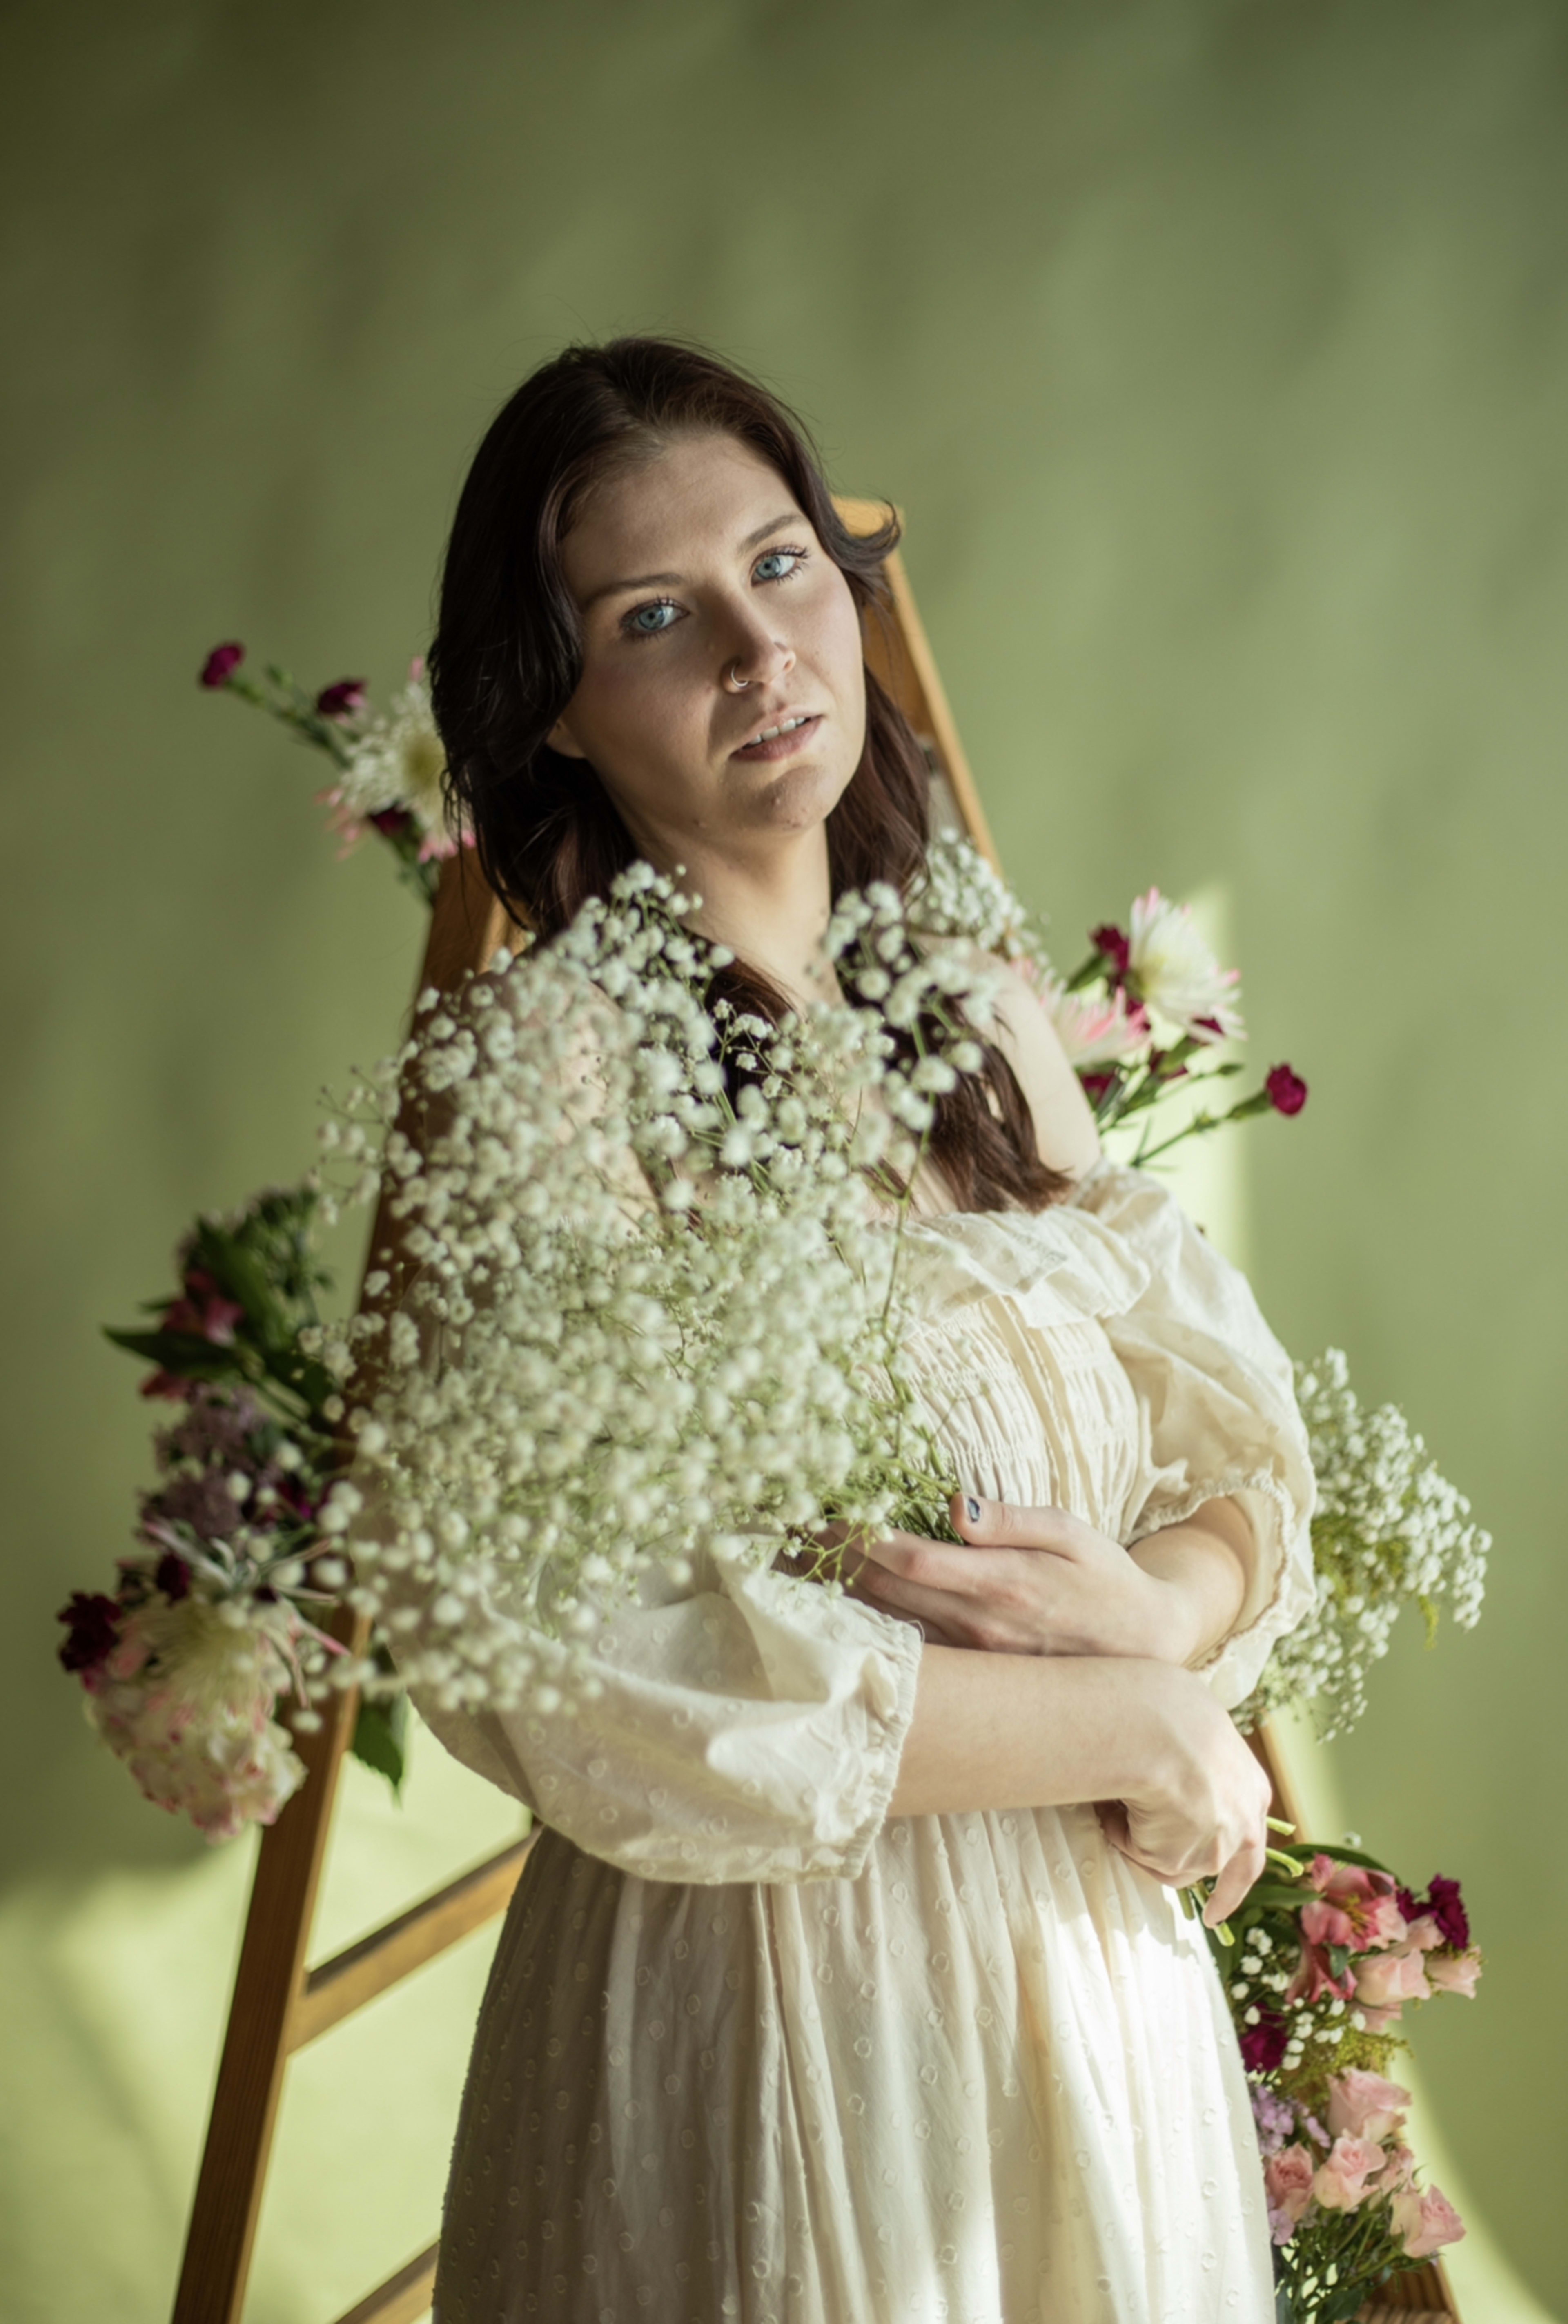 A fashion photo shoot featuring a white-dressed woman and a bouquet of spring flowers.